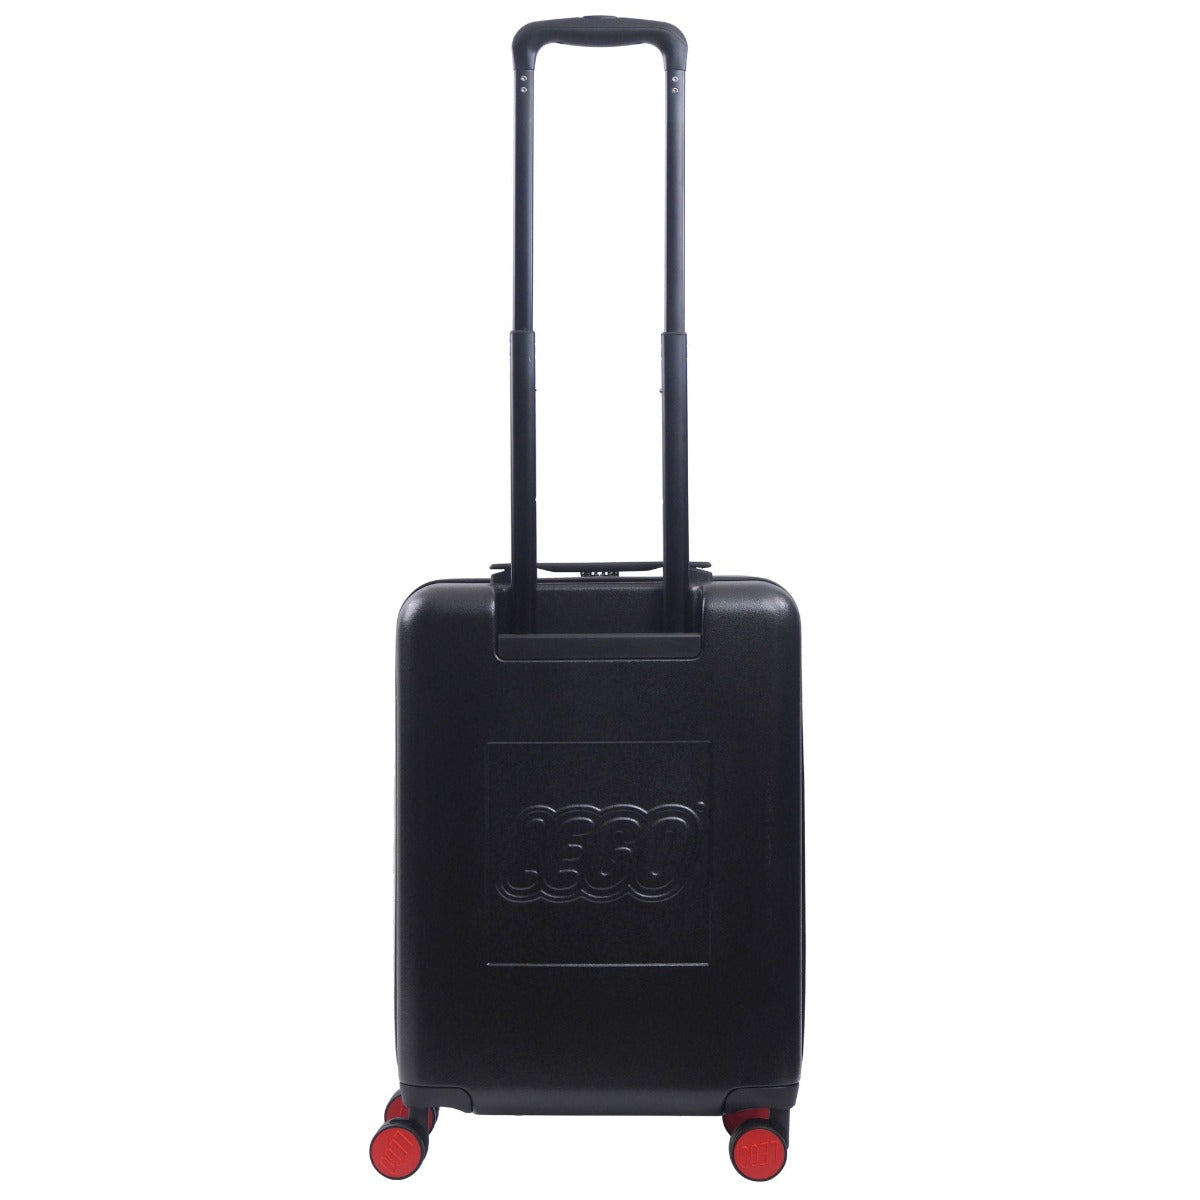 Lego Signature Brick 2X2 black red 21-inch carry-on hard-sided spinner suitcase